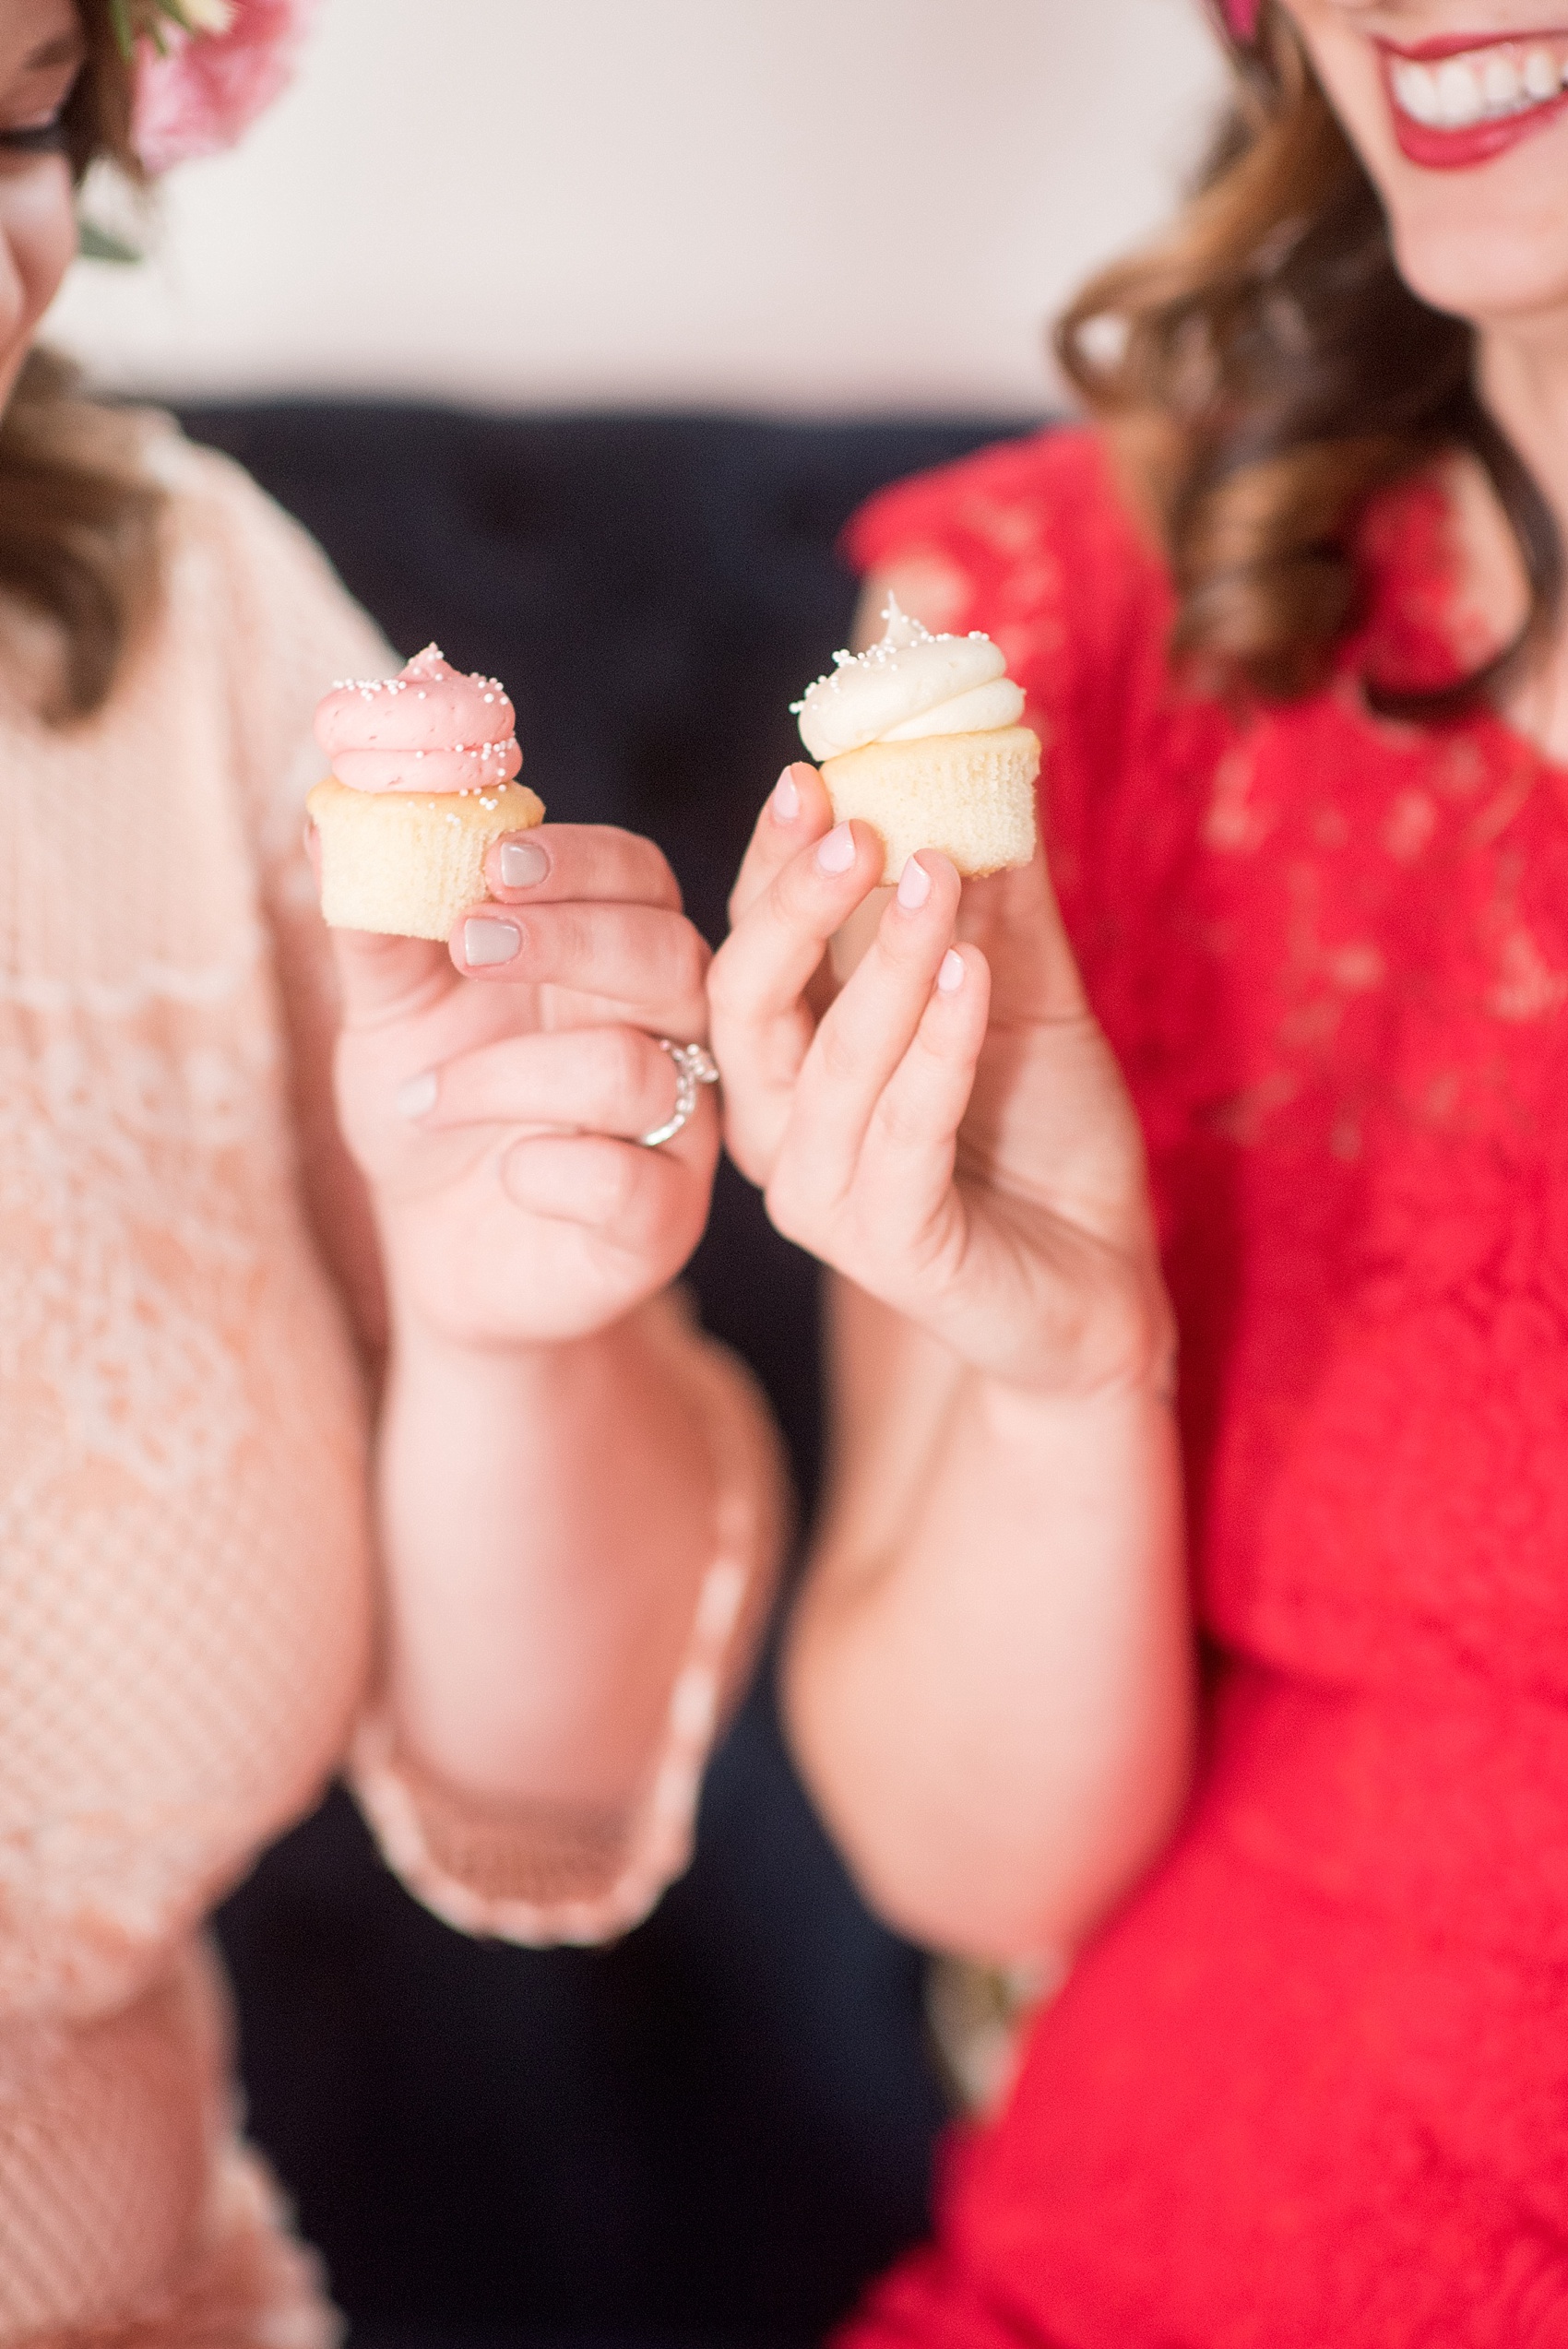 All Saints Chapel Raleigh bridal photos with an inspirational tea for Valentine's Day with pink and red mini cupcakes.